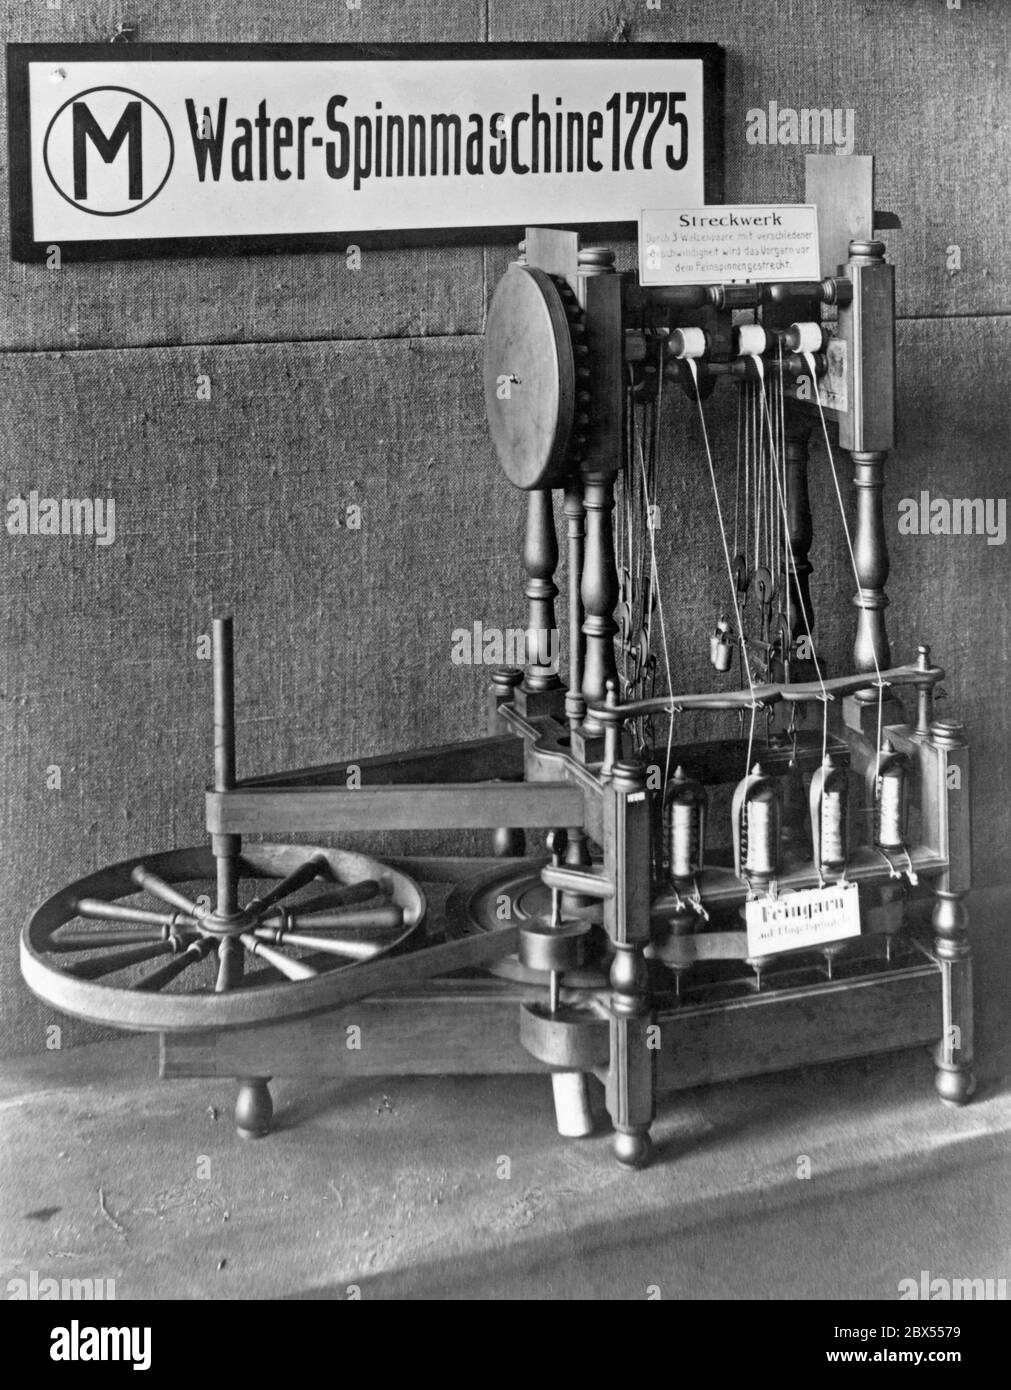 Exhibit in the Deutsches Museum in Munich. On display is one of the first functioning spinning machines: the water frame from England, constructed in 1775. It is accompanied by explanations on the functioning of the machine that spun the twine into fine yarn. The picture was probably taken in the 1930s. Stock Photo